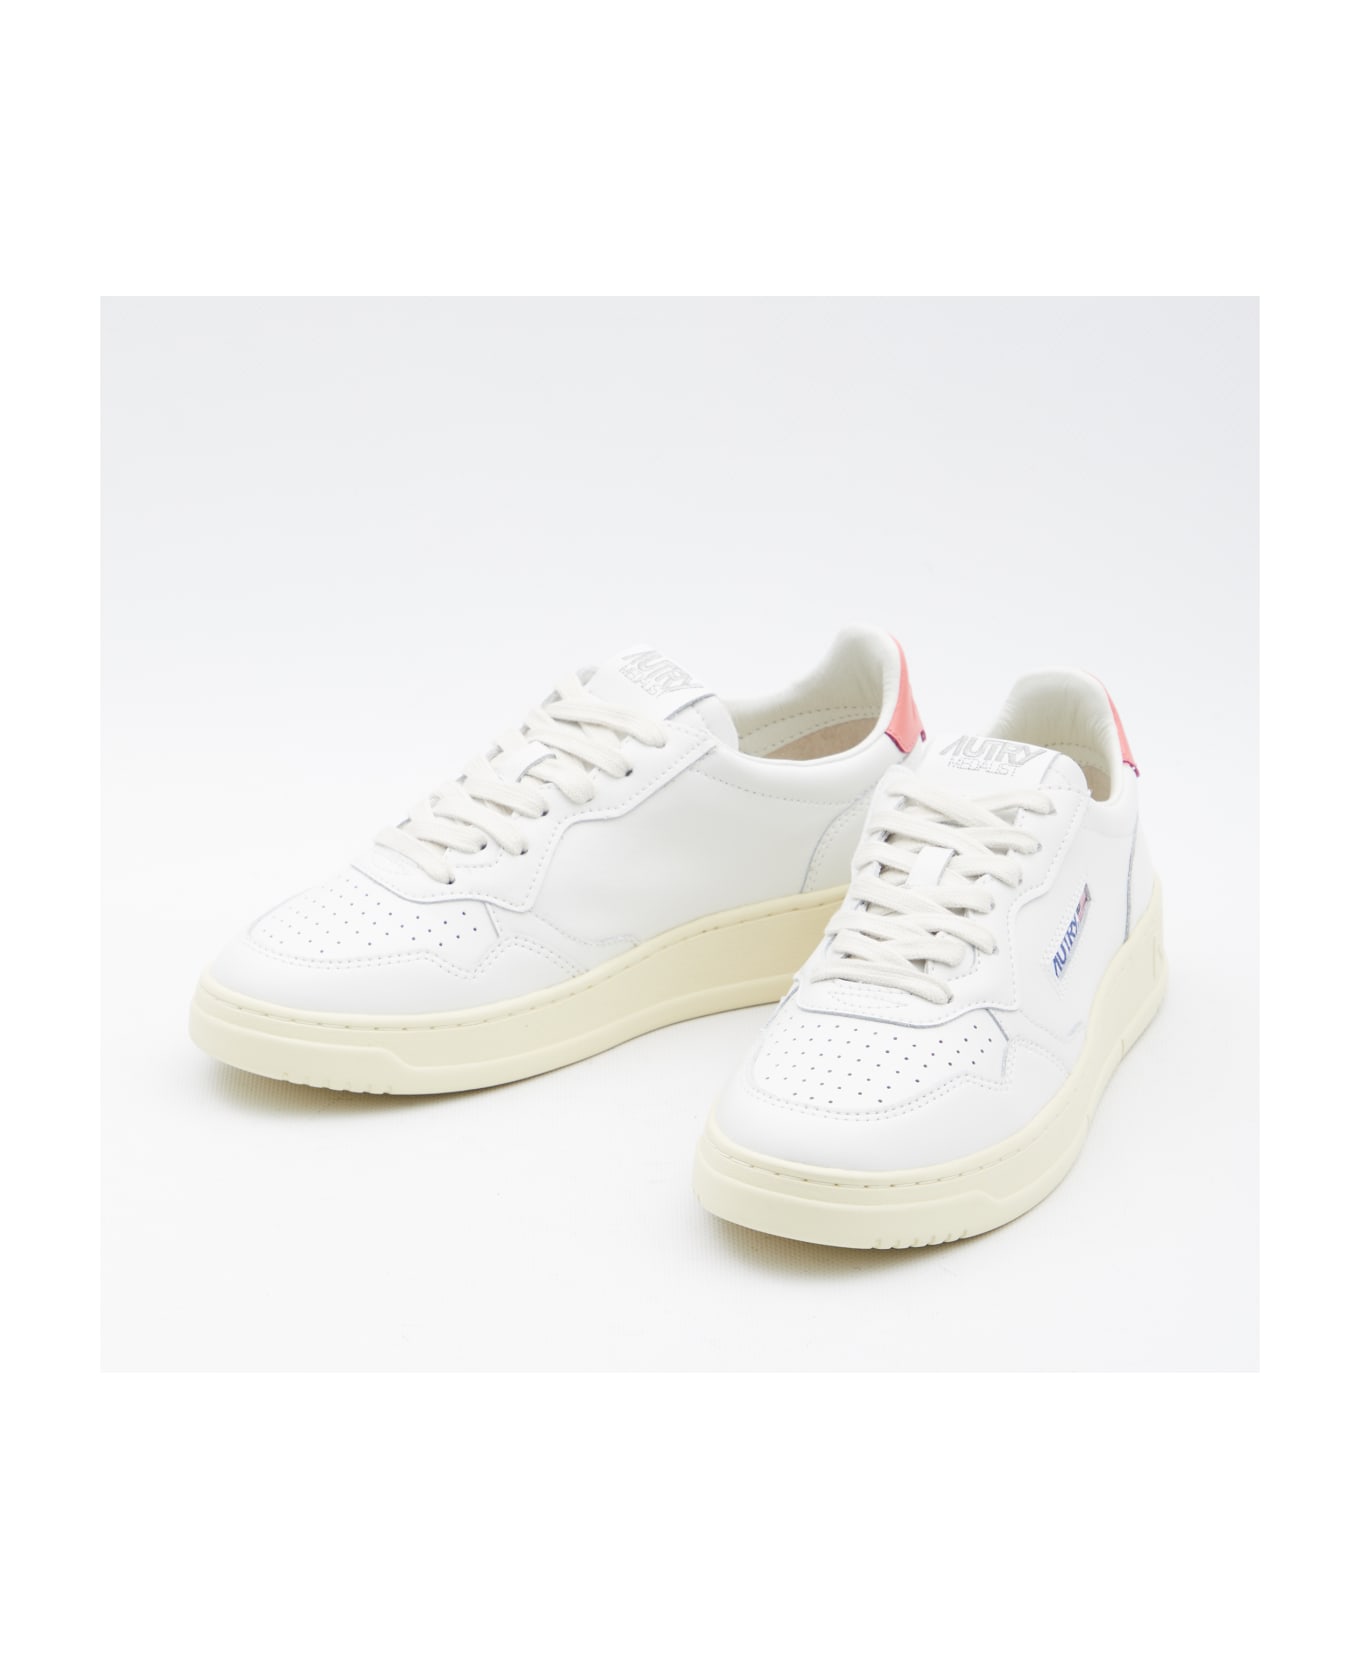 Autry Medalist Low Sneakers - WHITE